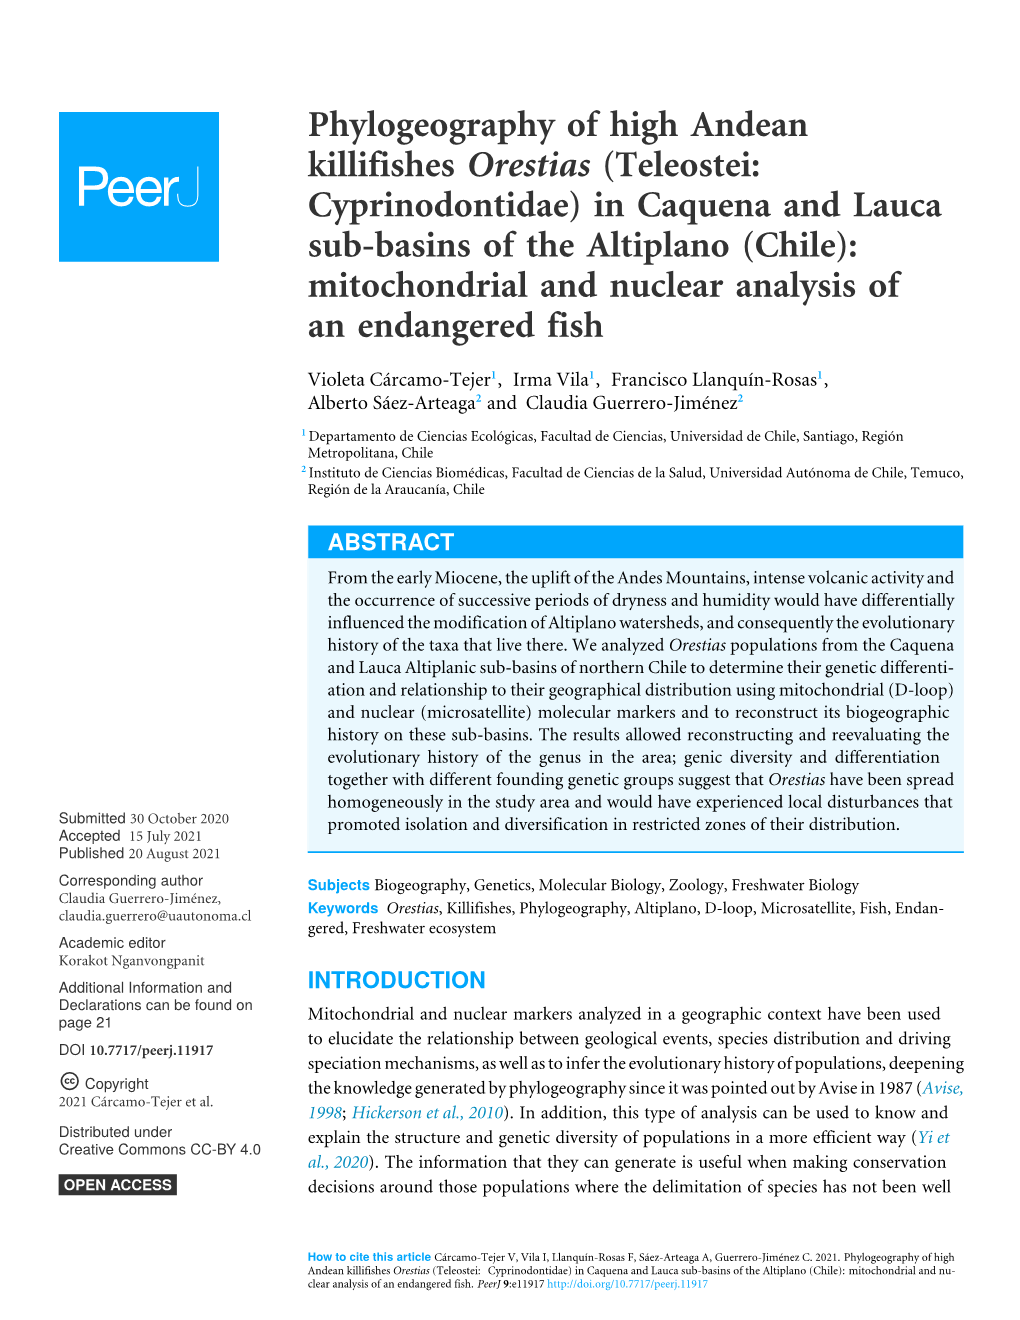 In Caquena and Lauca Sub-Basins of the Altiplano (Chile): Mitochondrial and Nuclear Analysis of an Endangered Fish